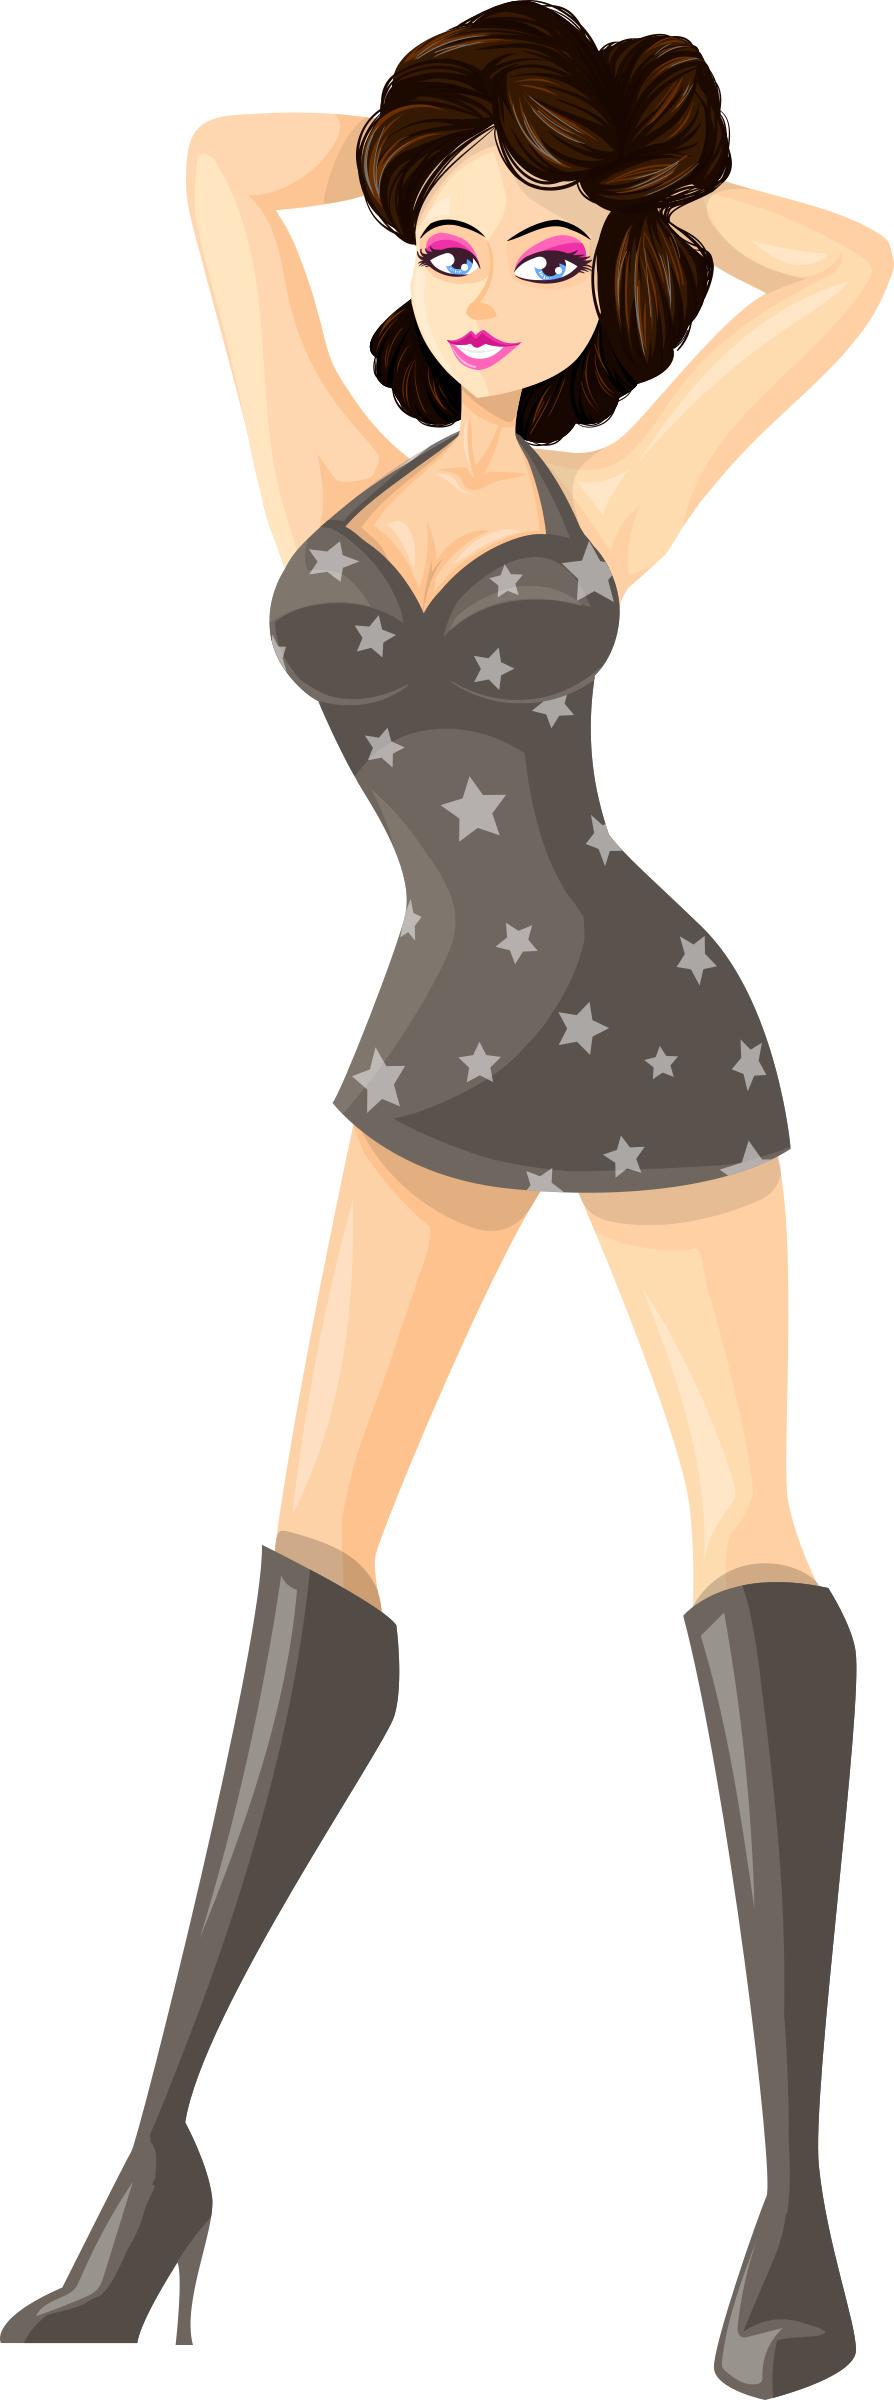 Young lady 2 (brown hair, light skin, starry dress #1) png